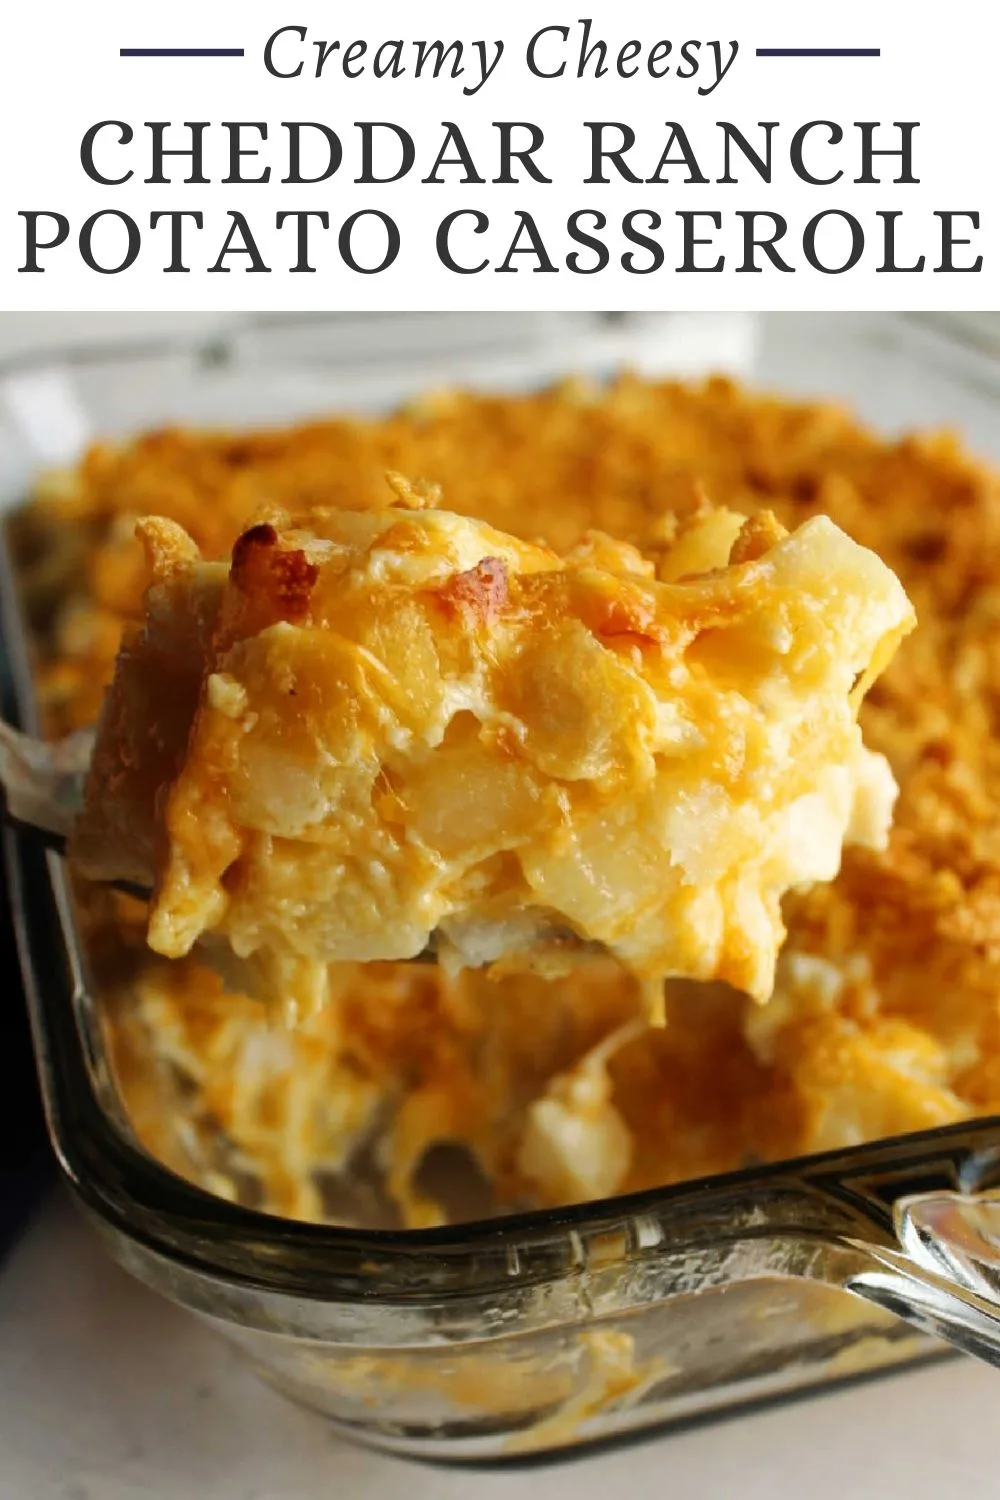 Creamy savory cheddar ranch cheesy potato casserole takes your favorite funeral potatoes and adds a hit of ranch to make it next level. This potato bake is perfect for parties, holidays or any kind of gathering.